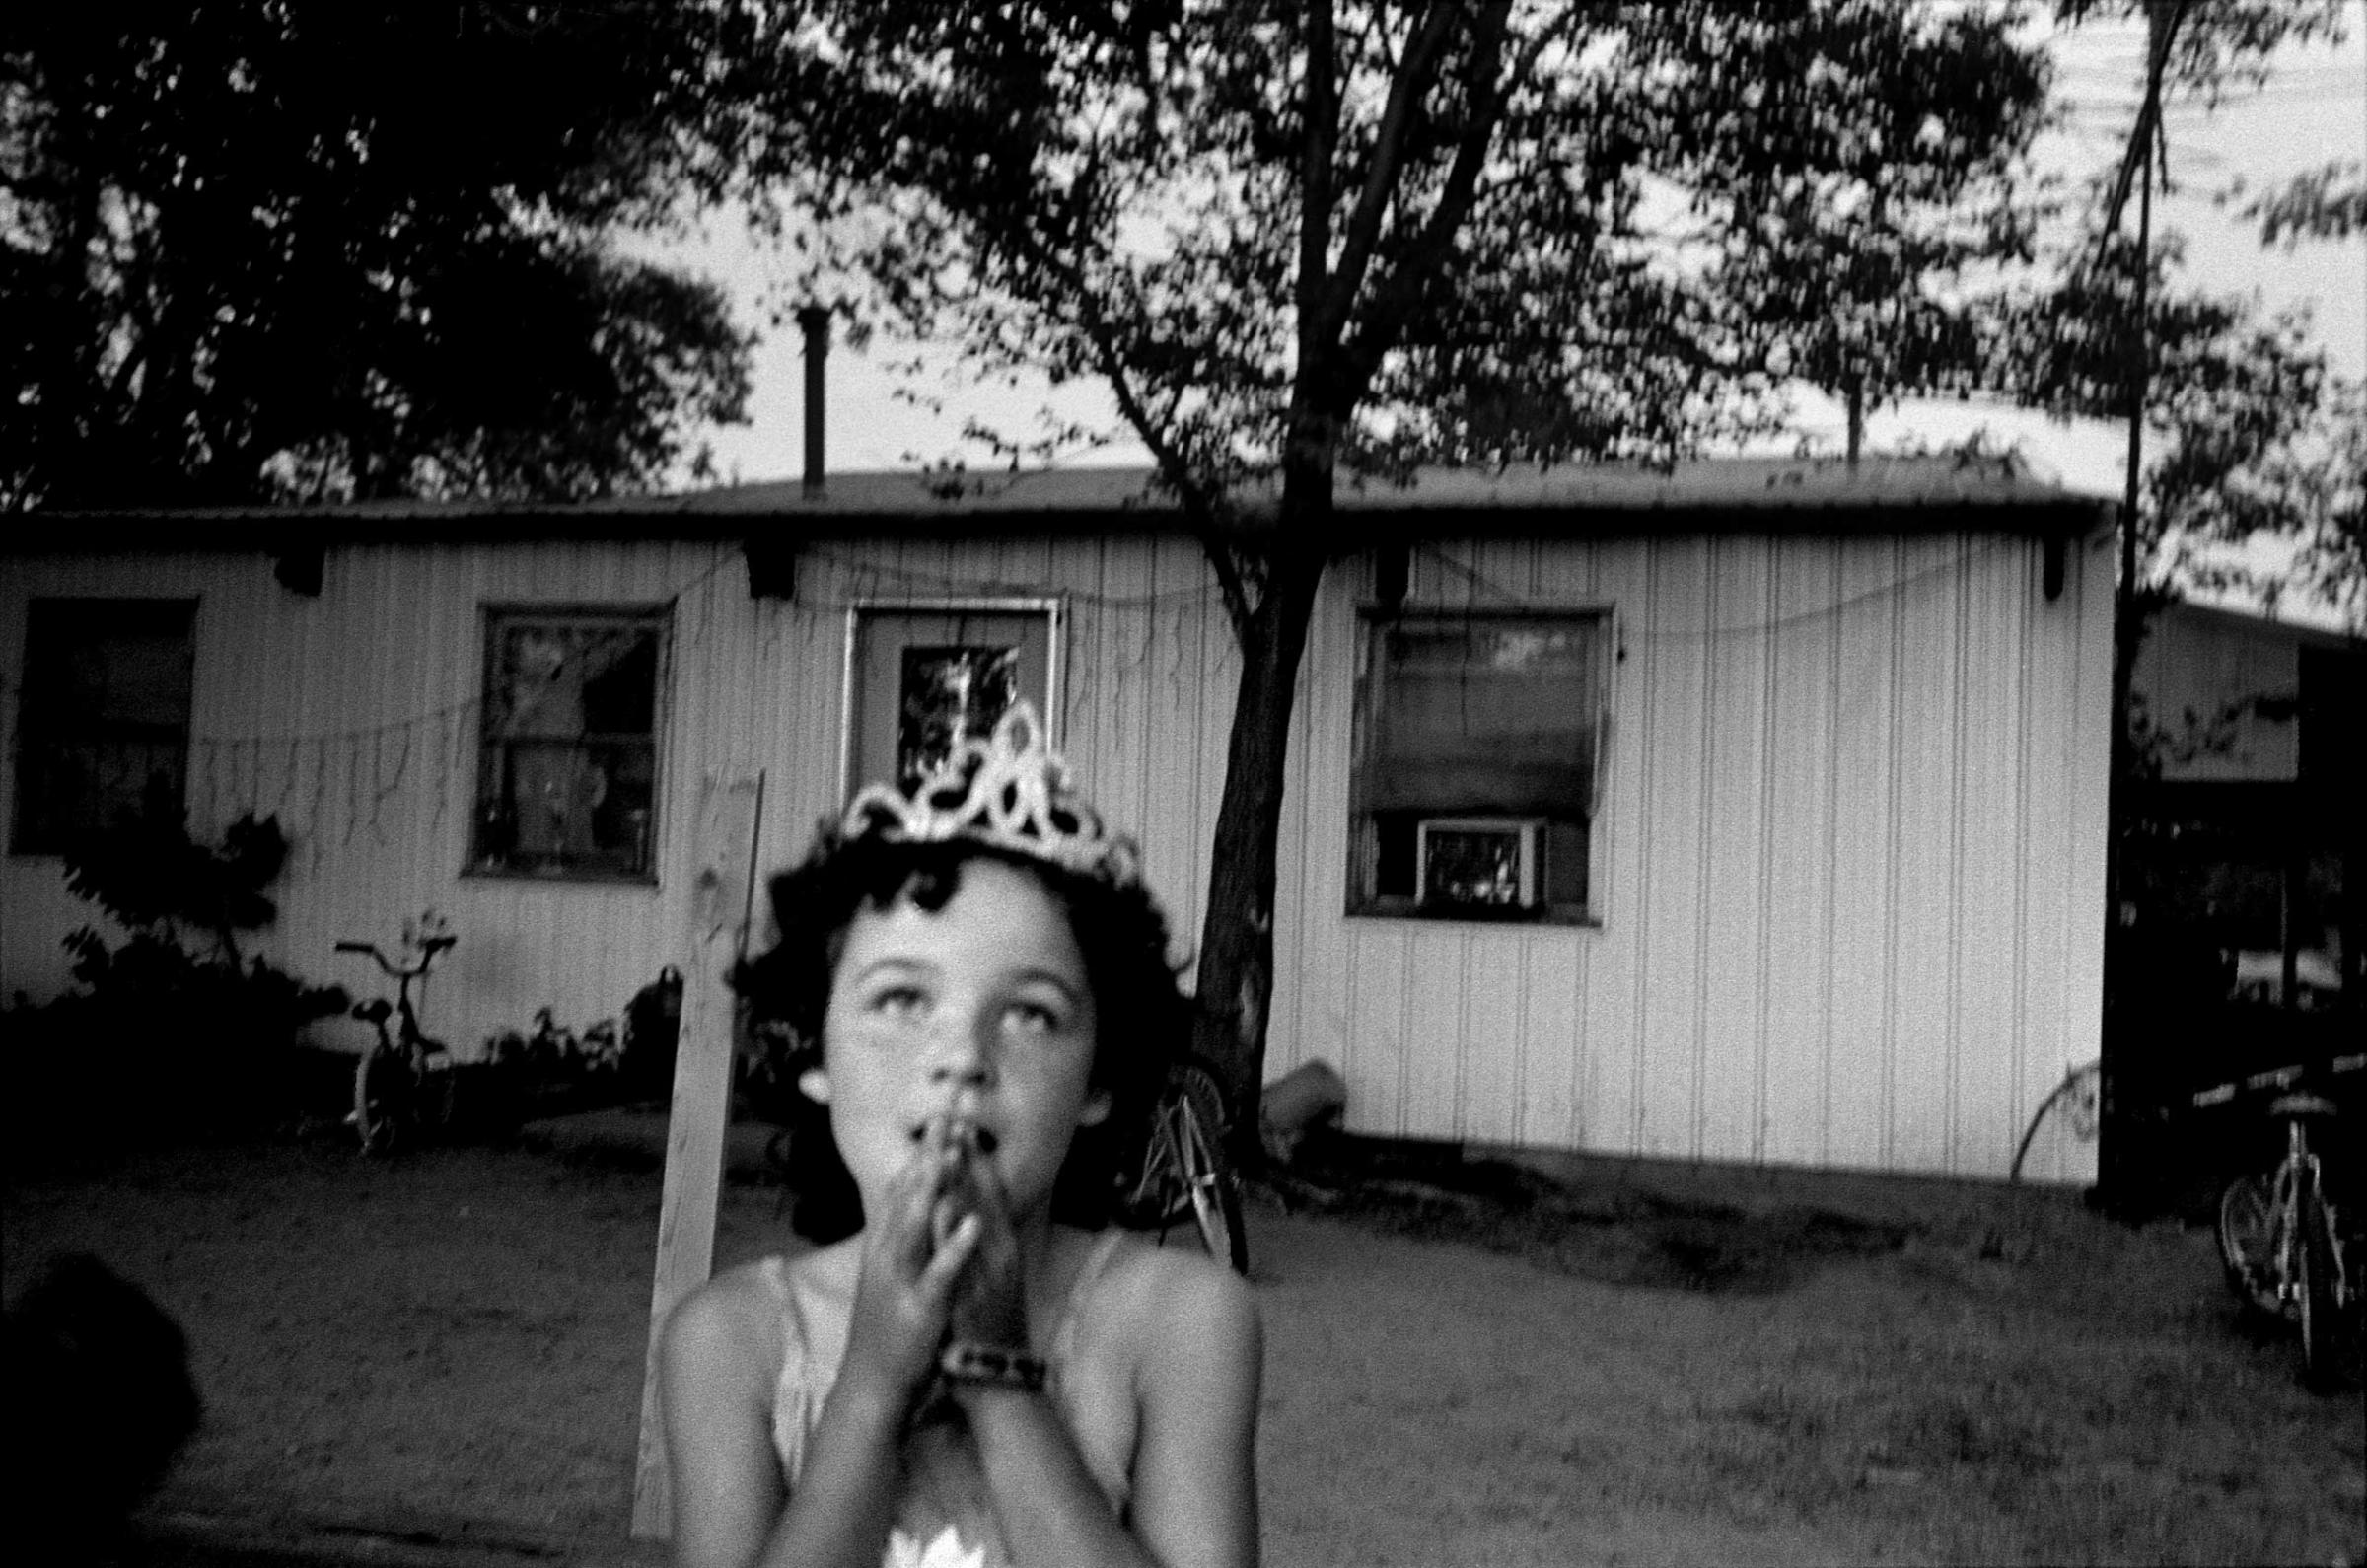 A young girl dreams of becoming a summer festival queen like her older sister, Conesville, Iowa. (2003)